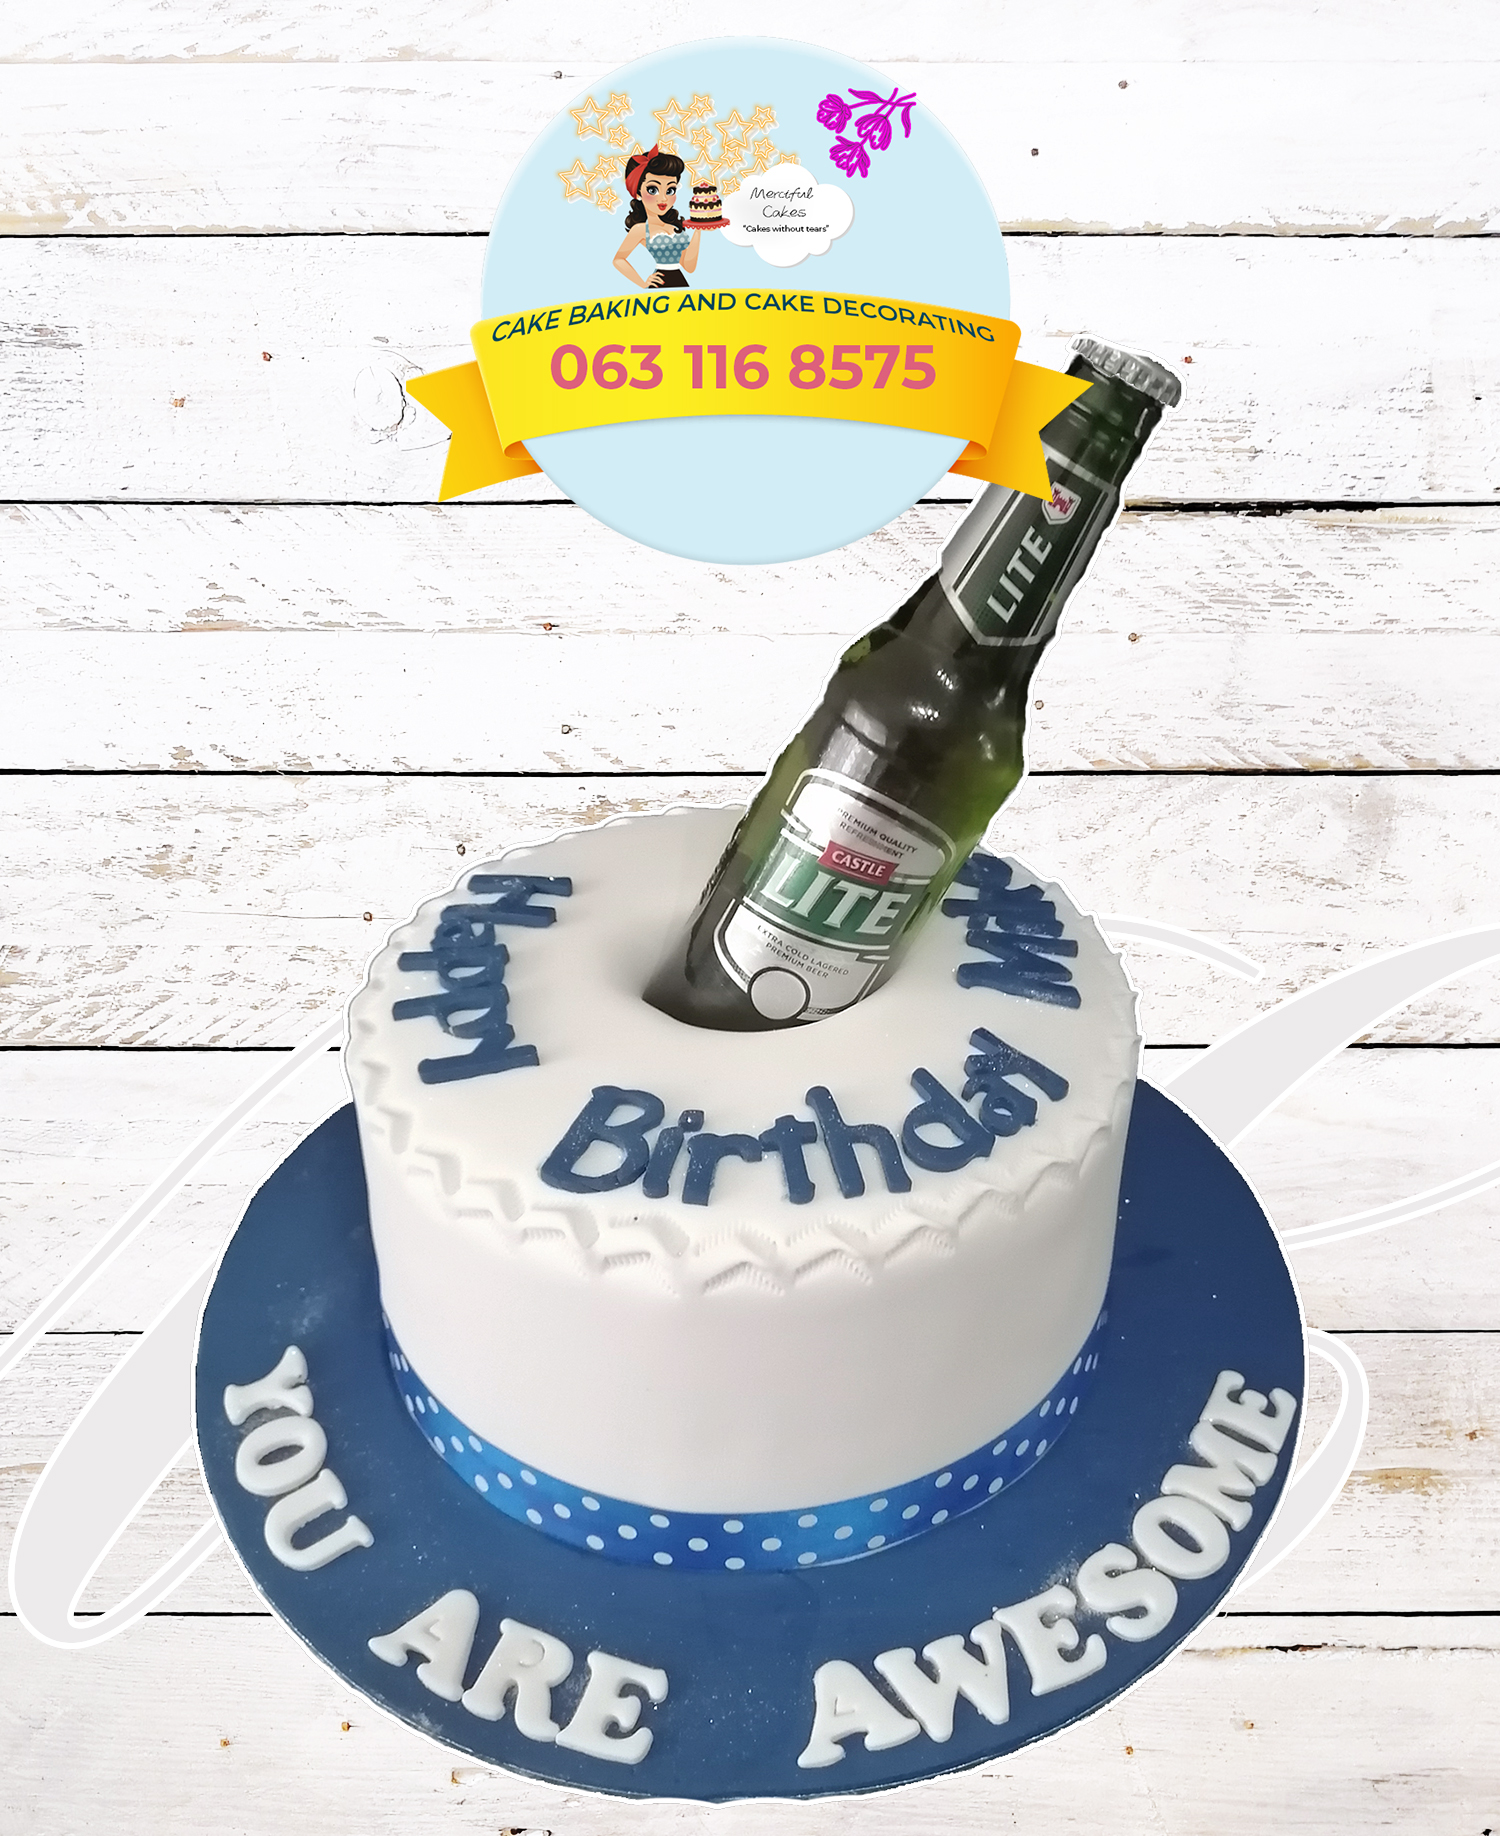 Stella Artois Beer Can Cake - Buy Online, Free UK Delivery — New Cakes